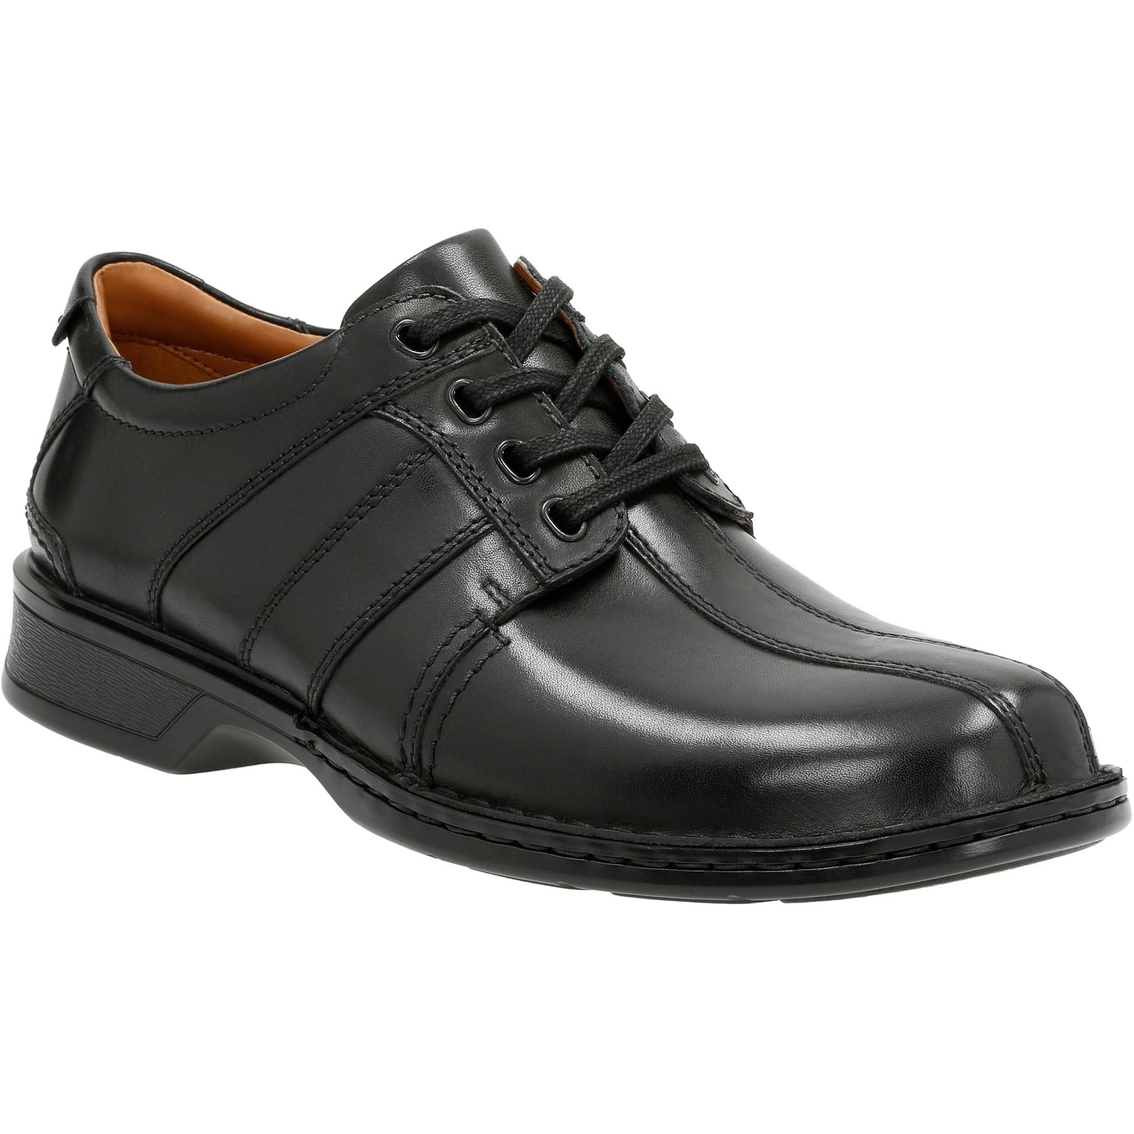 clark touareg shoes off 61% - online-sms.in